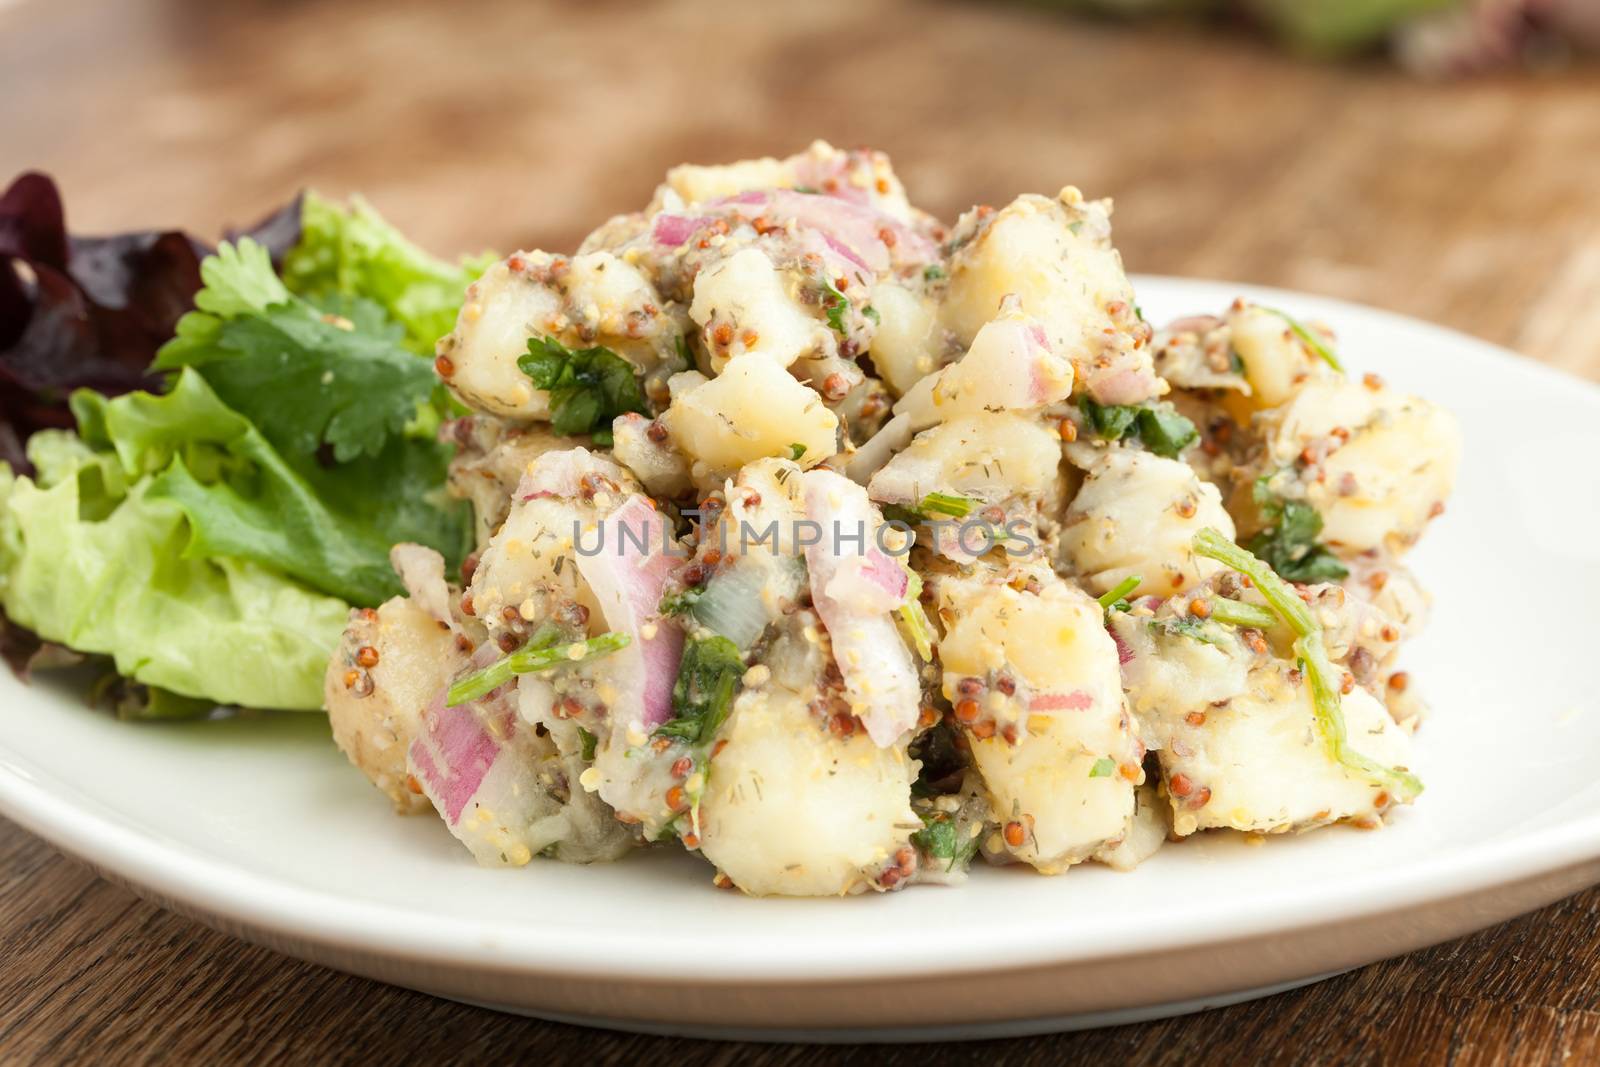 Healthy Homemade Potato Salad by graficallyminded